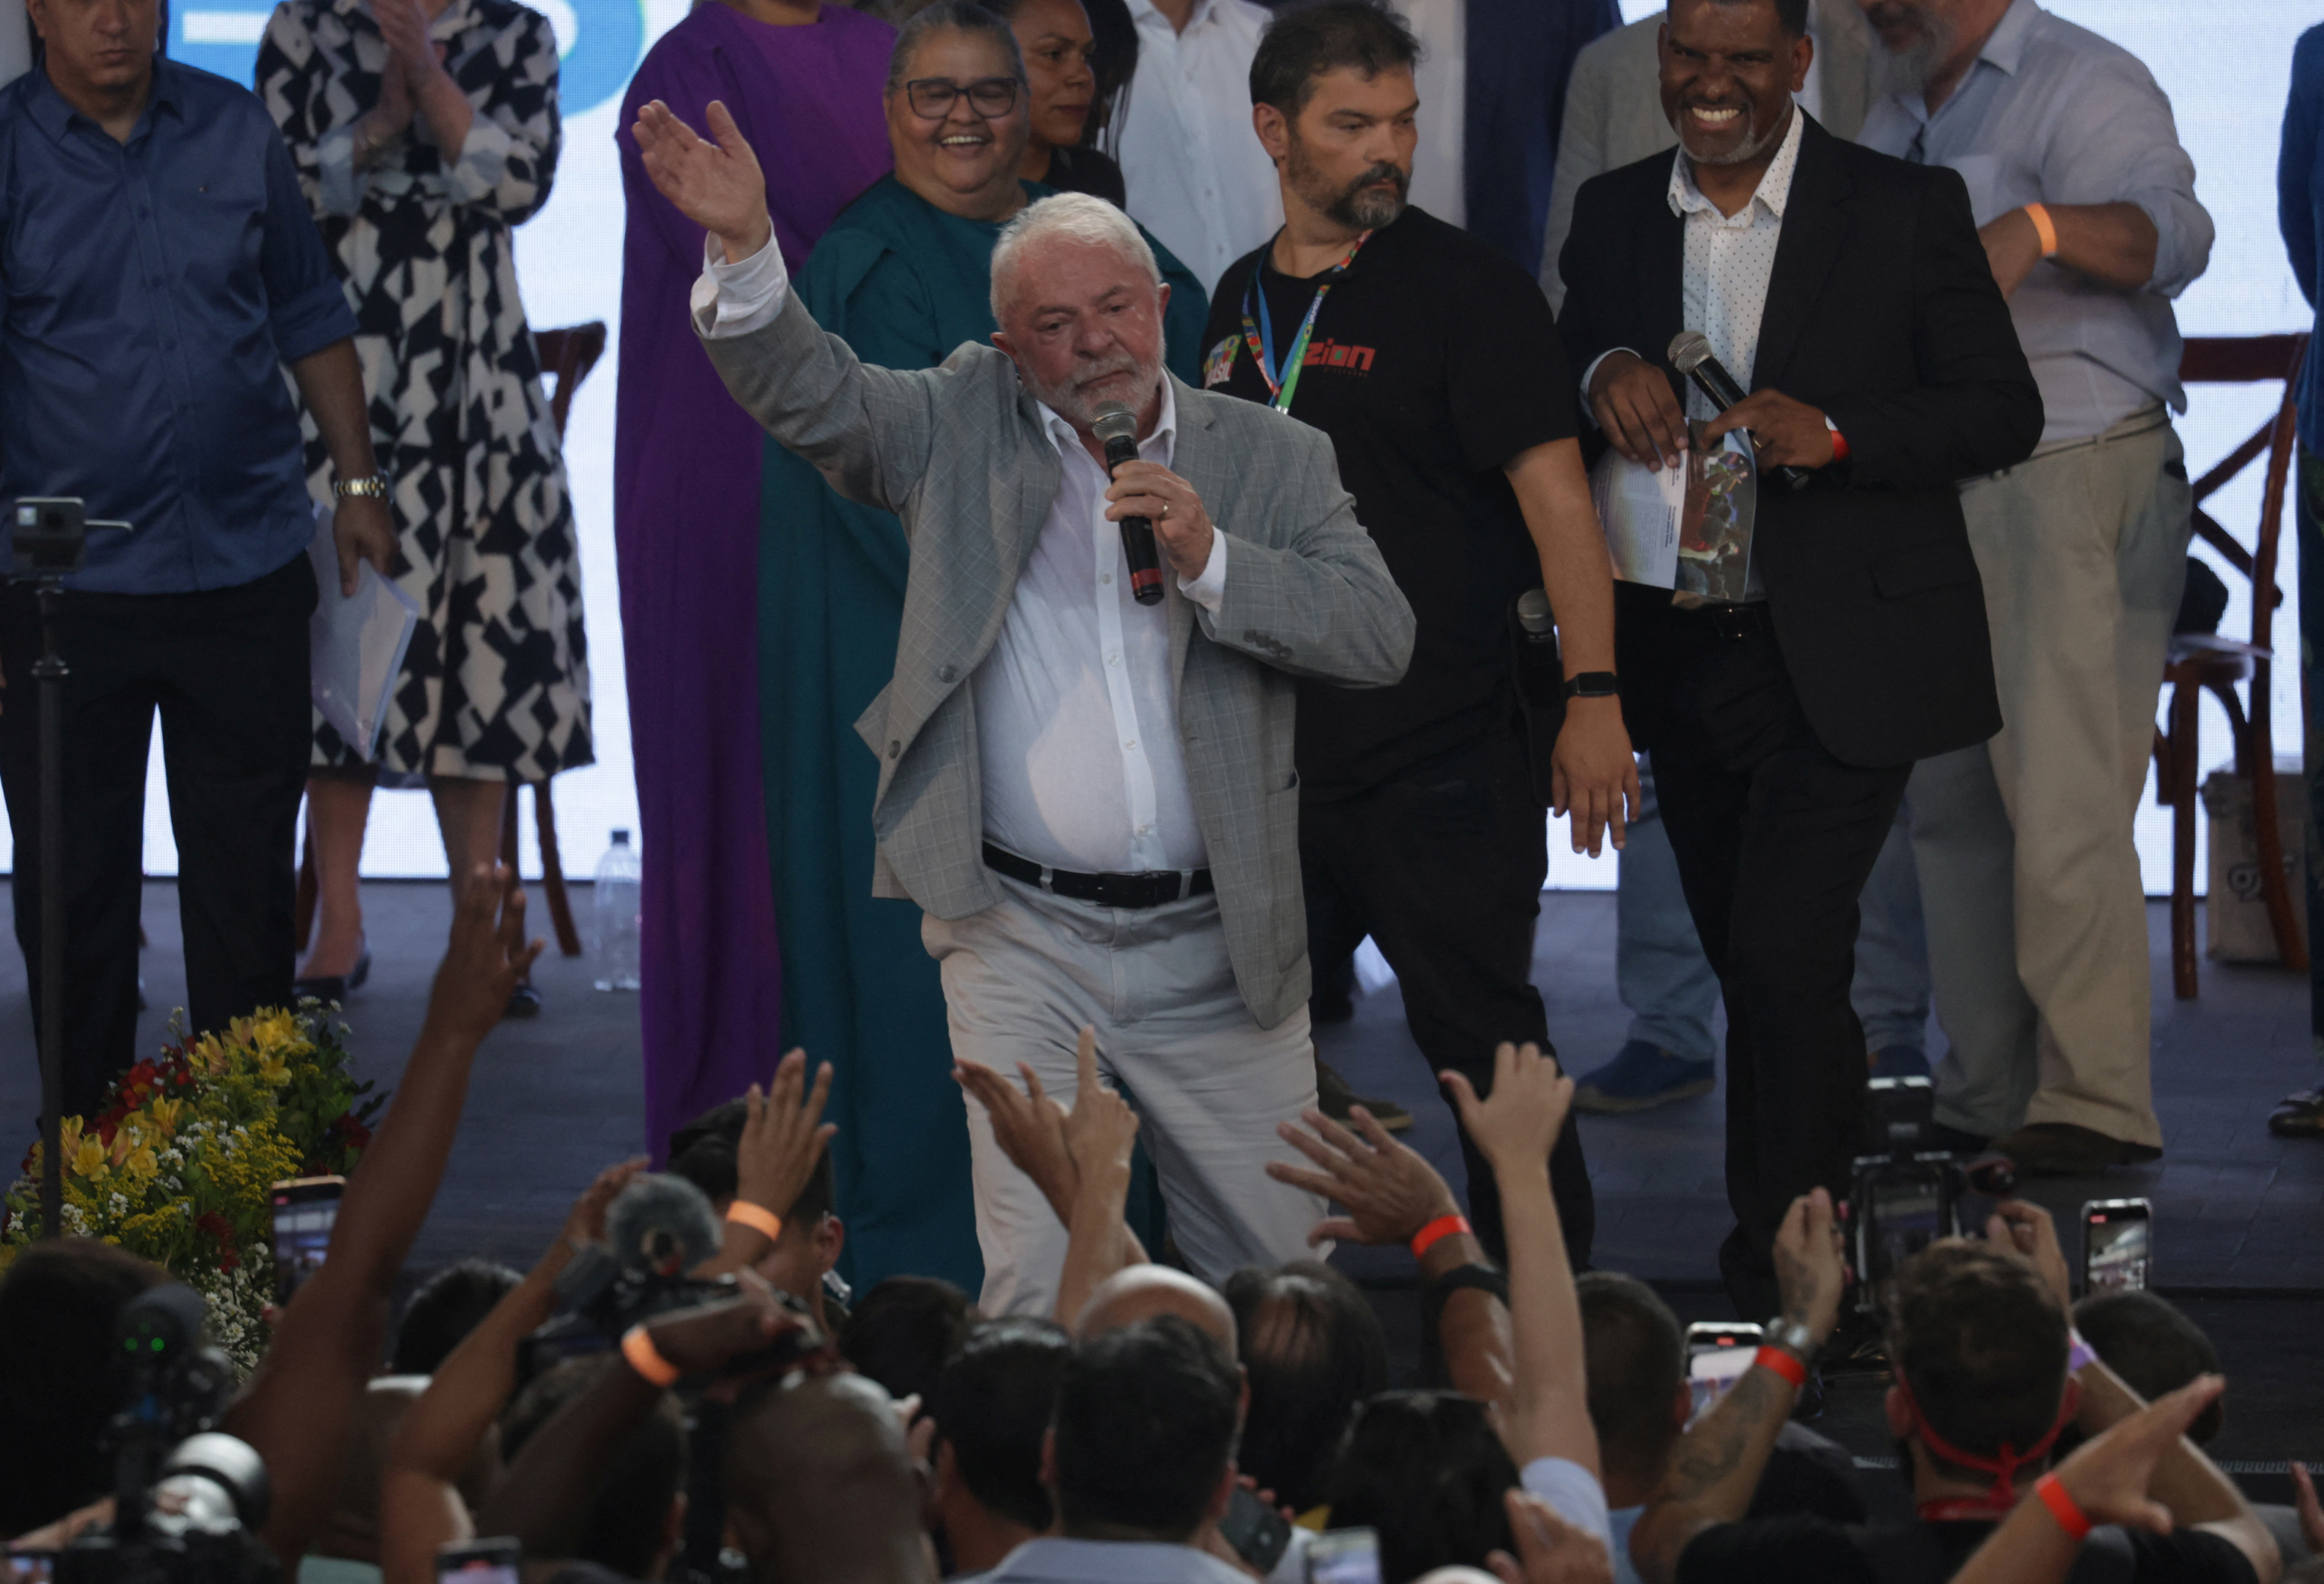 Former President and presidential candidate Luiz Inacio Lula da Silva meets evangelical leaders in Sao Goncalo